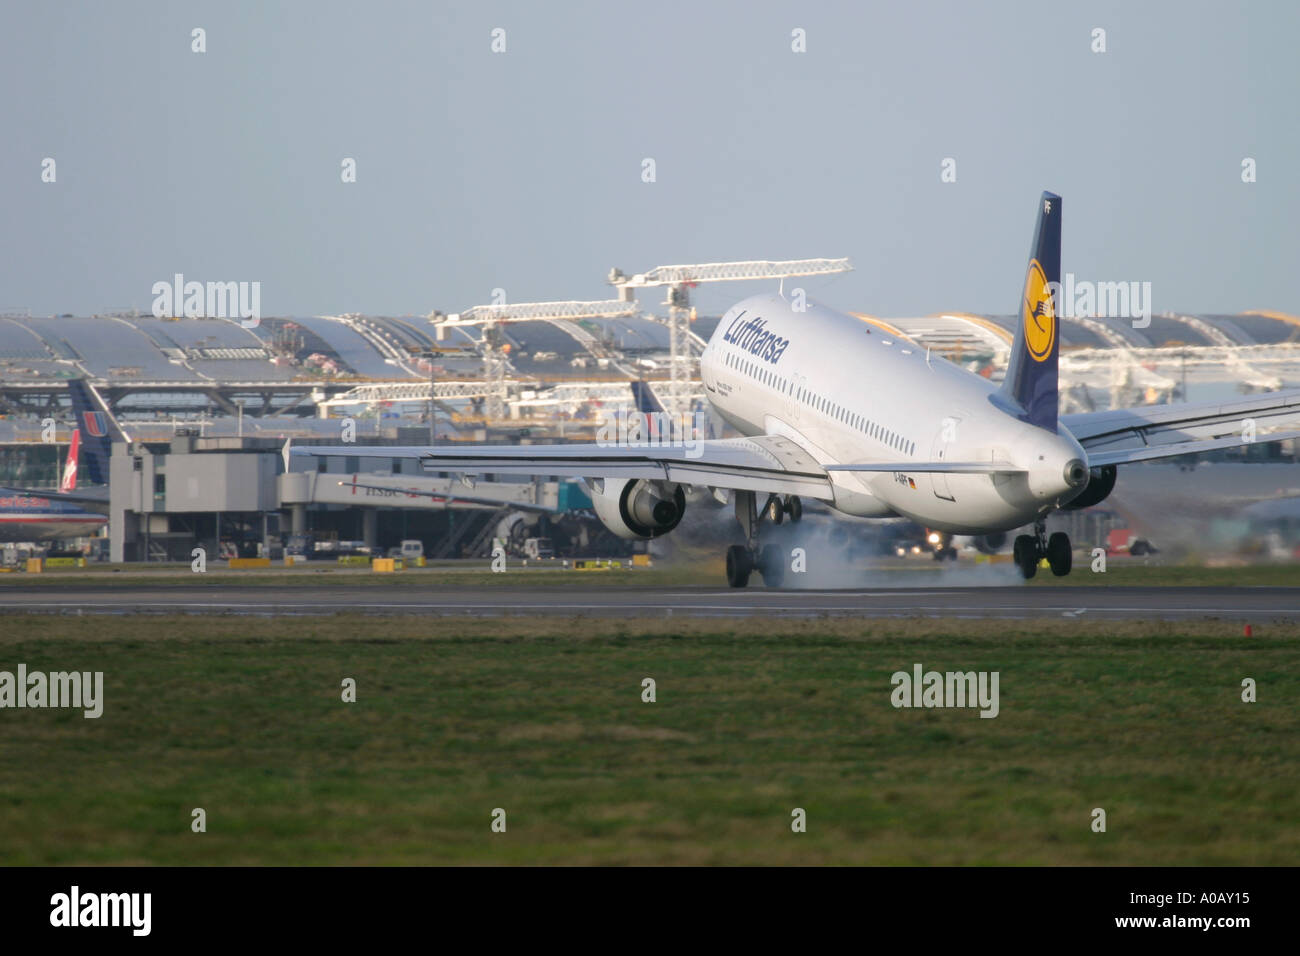 Lufthansa Airbus A320 211 D-AIPF touching down at London Heathrow. In the background visible constructing work of new Terminal 5 Stock Photo